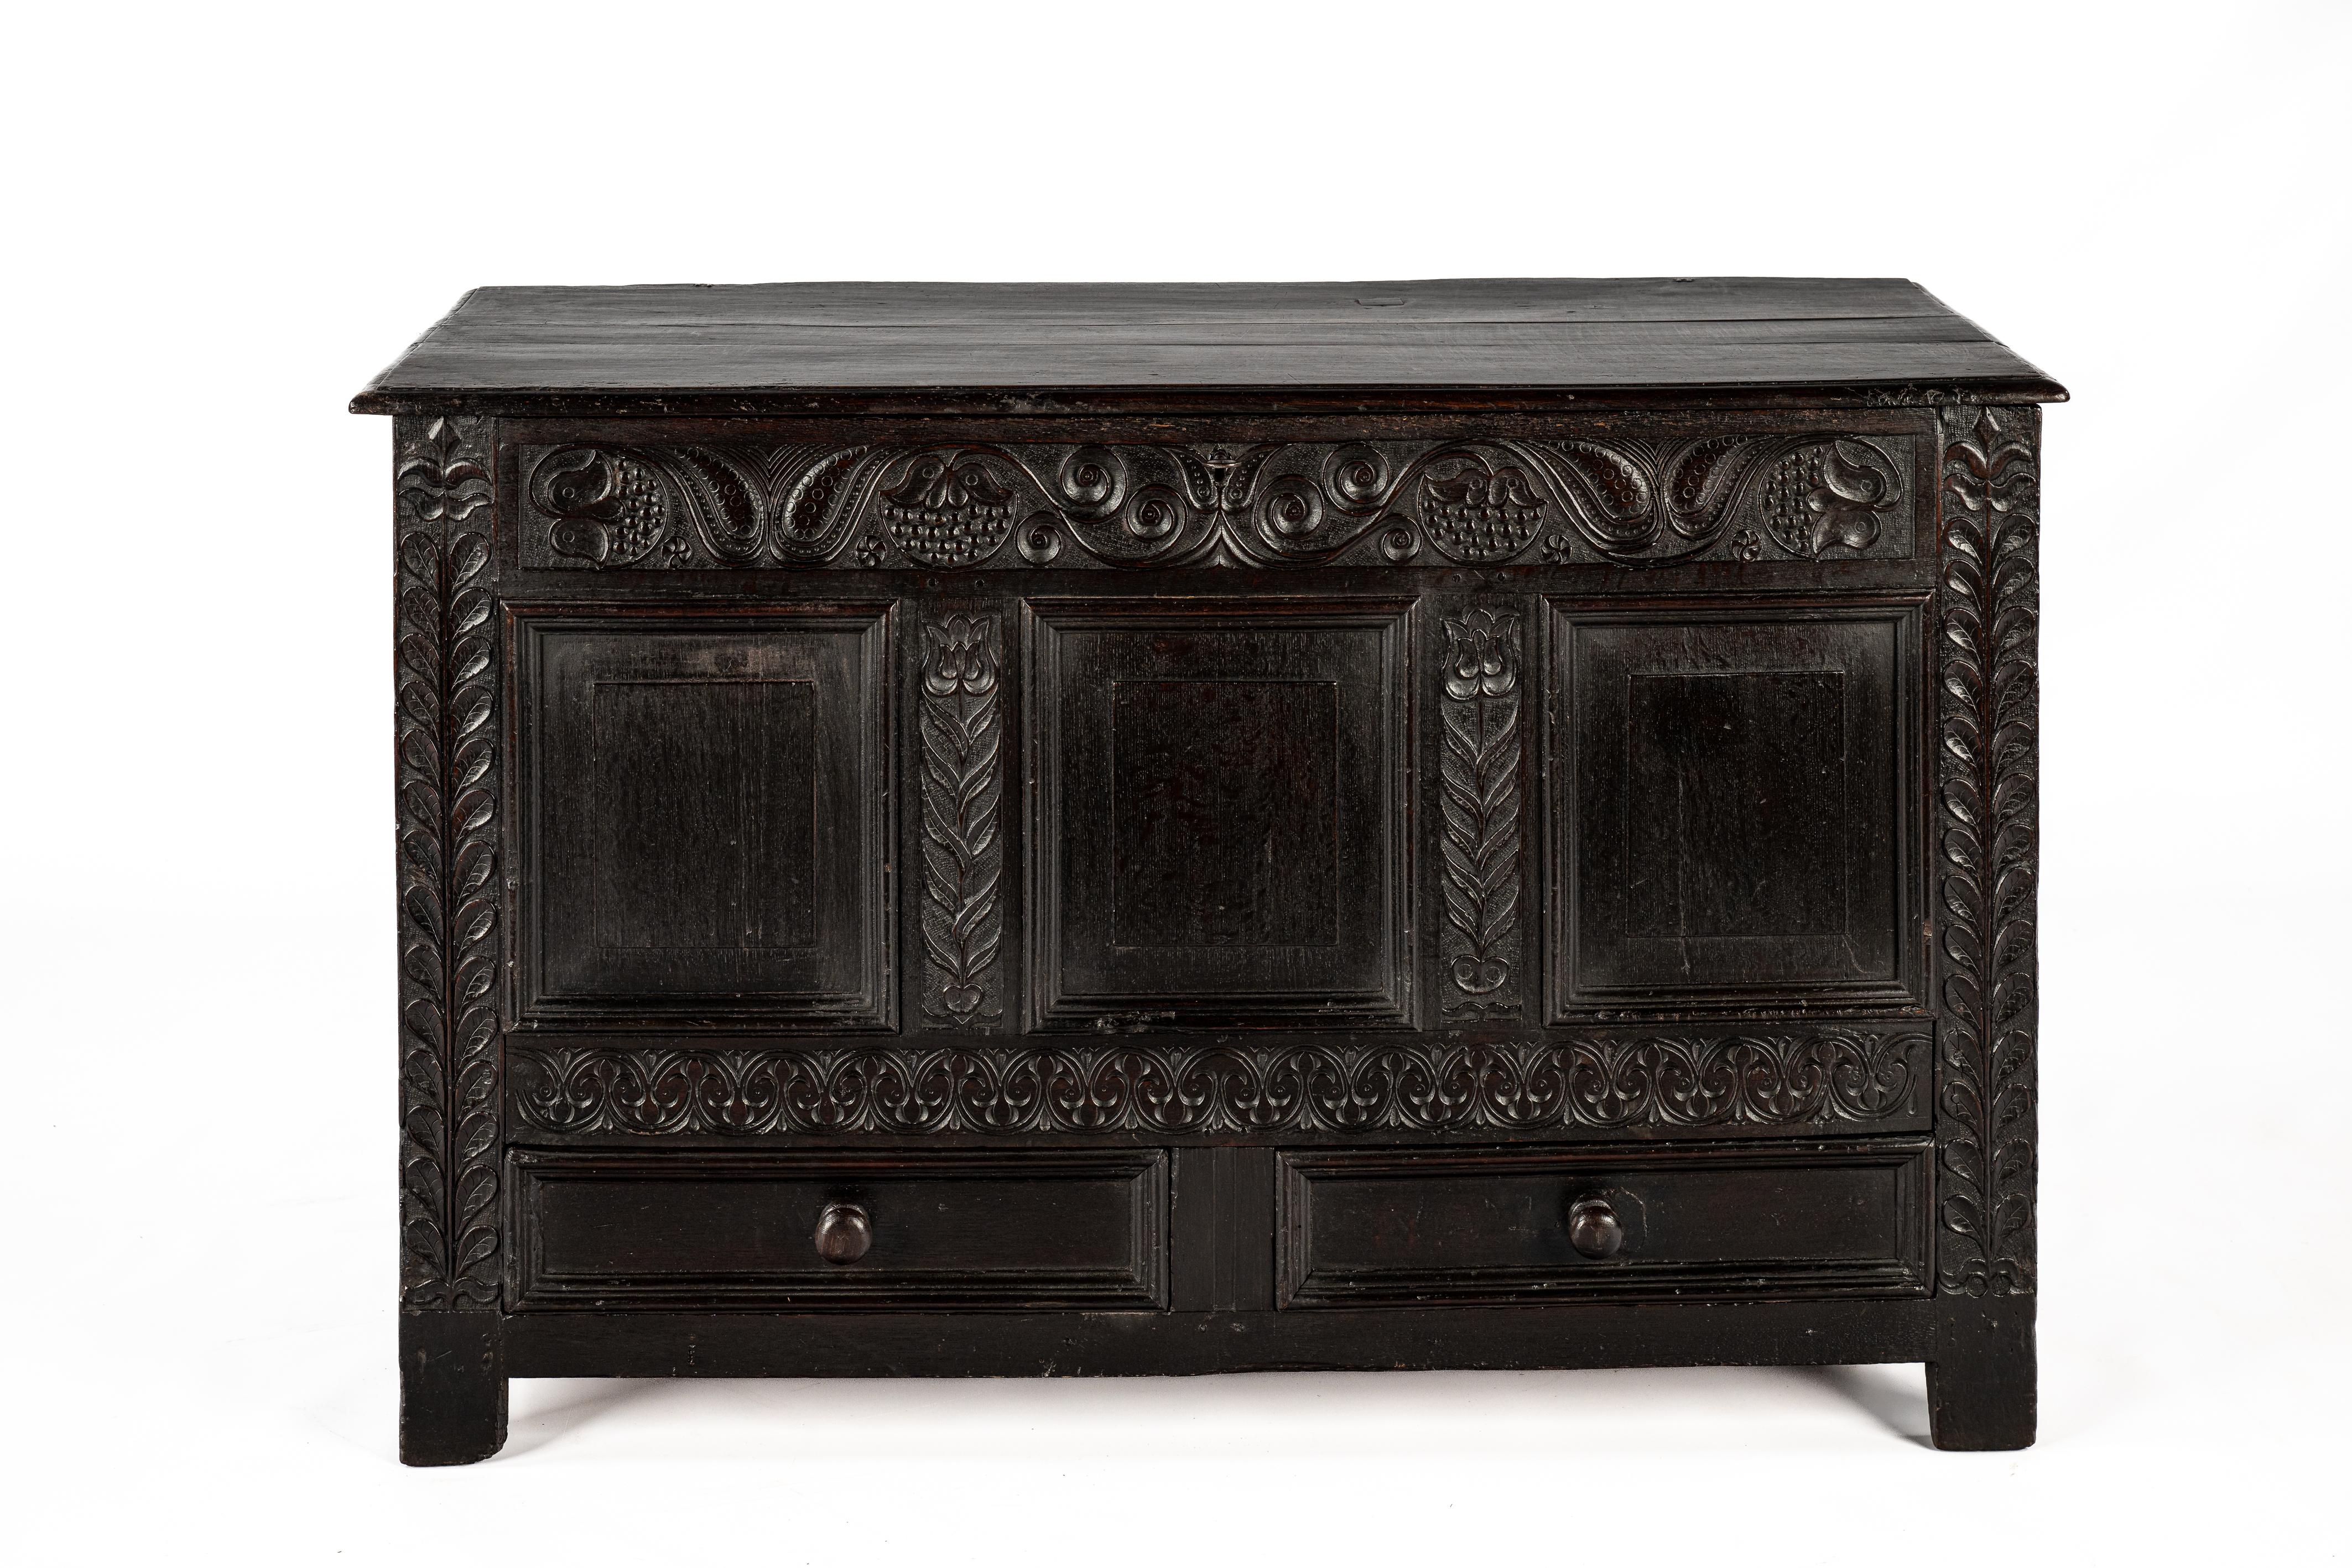 This beautiful antique chest was crafted in England at the end of the 18th century. The chest is entirely made of solid oak wood. Its front features three recessed panels with two drawers underneath. The framework of the chest is richly adorned with